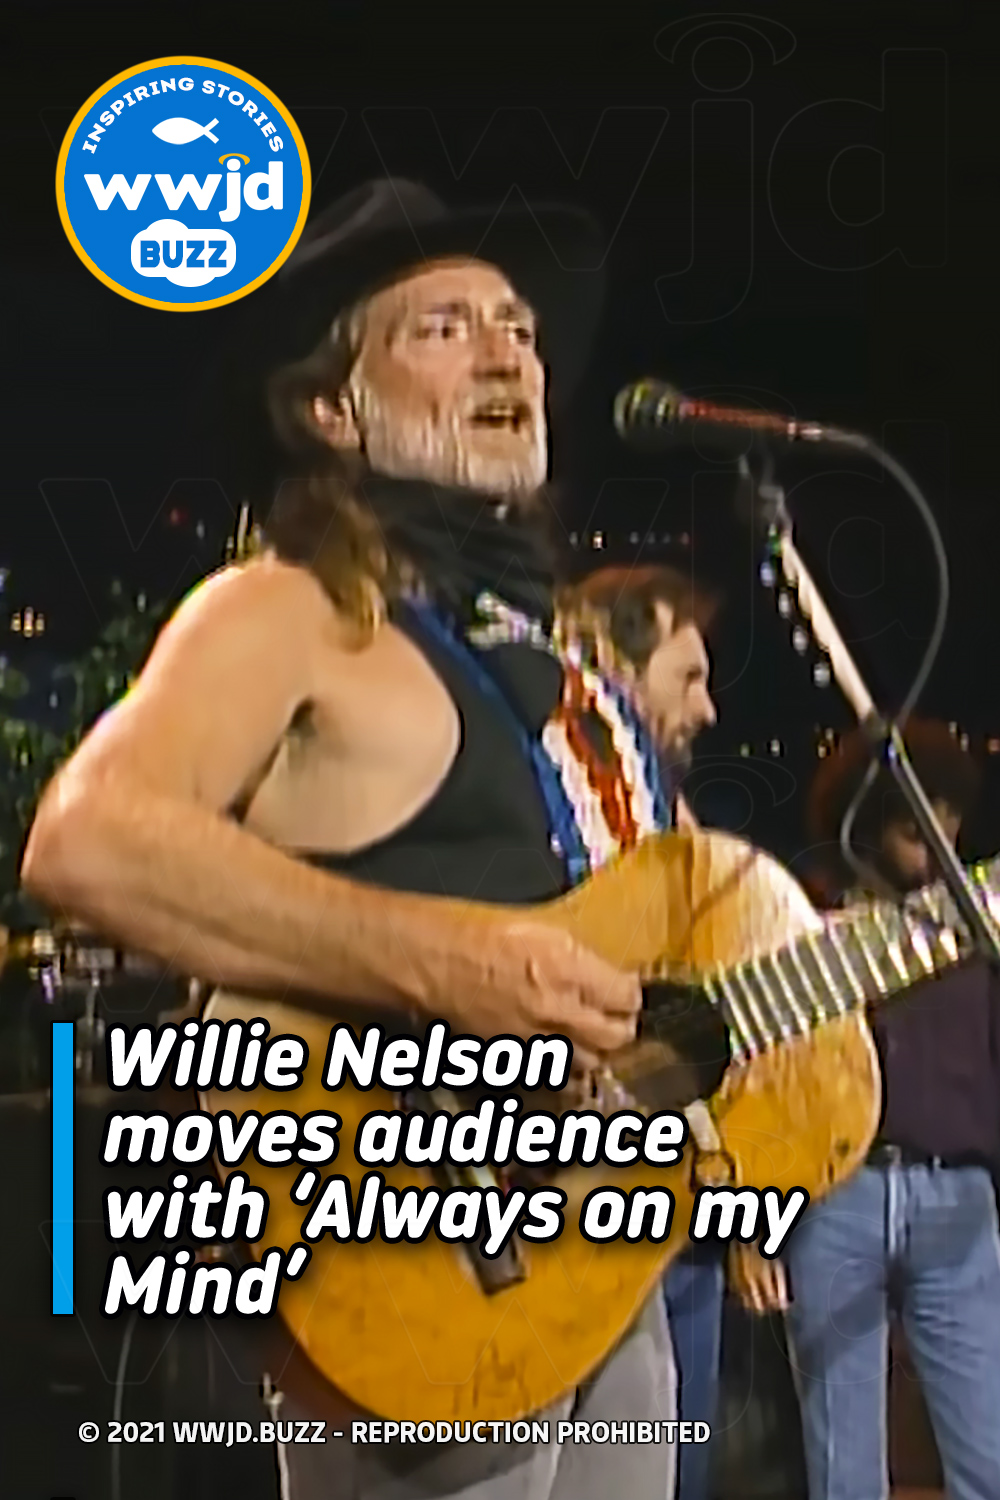 Willie Nelson moves audience with ‘Always on my Mind’